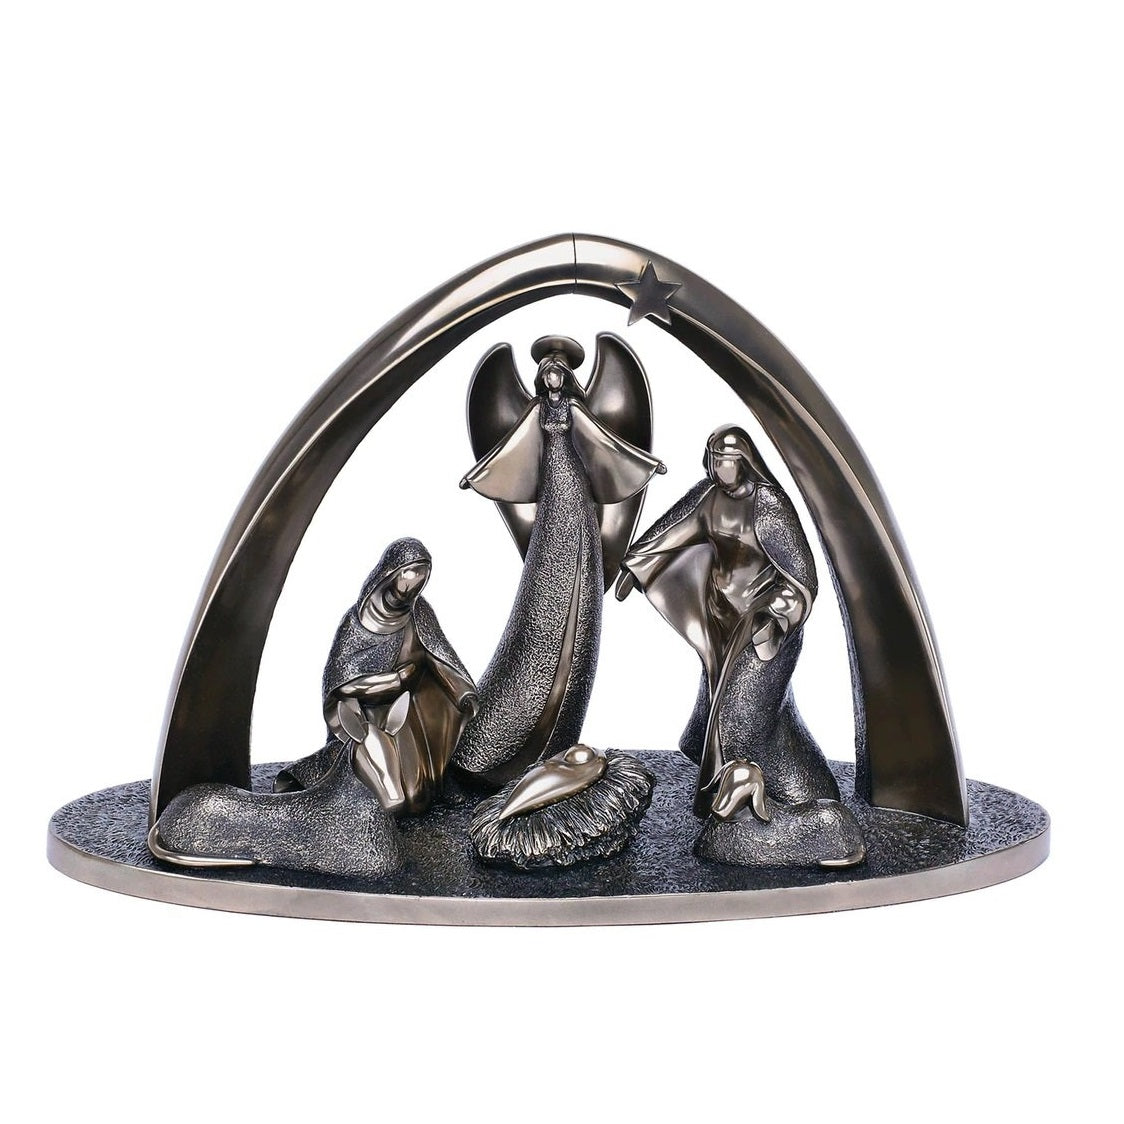 Genesis Nativity Scene  A hand crafted bronze nativity scene including angel that brings to life the story of Christmas.